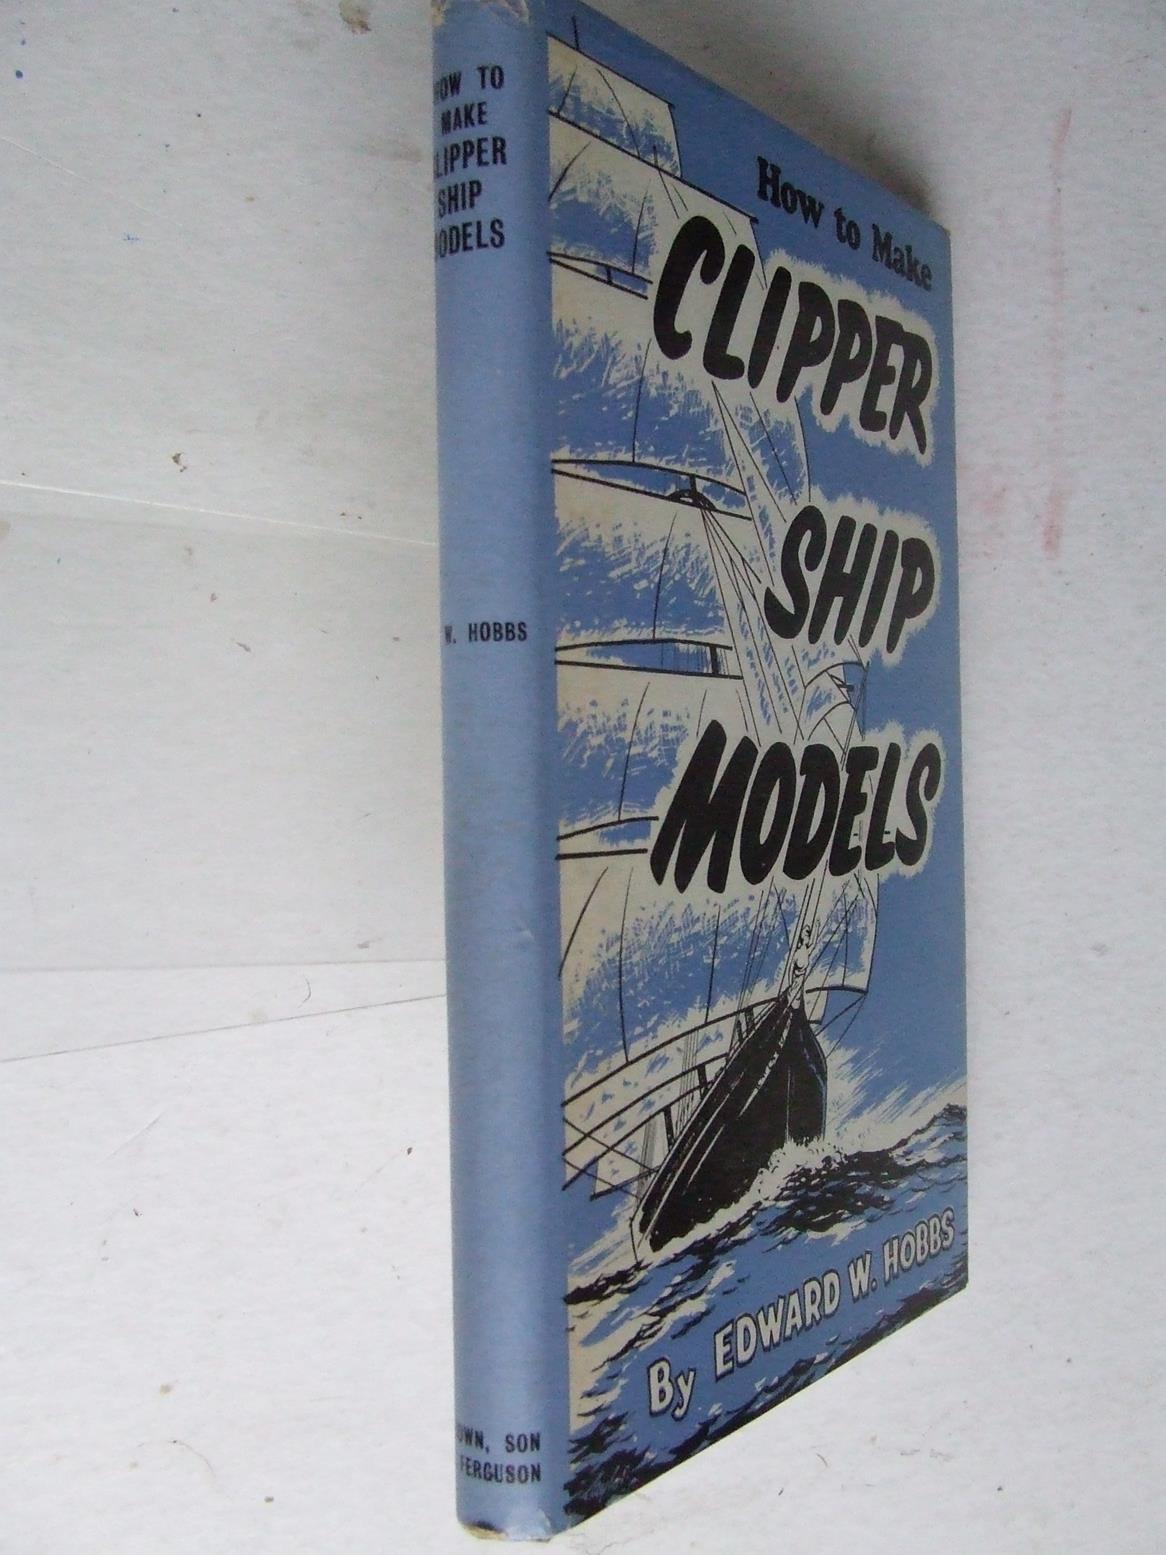 How to Make Clipper Ship Models